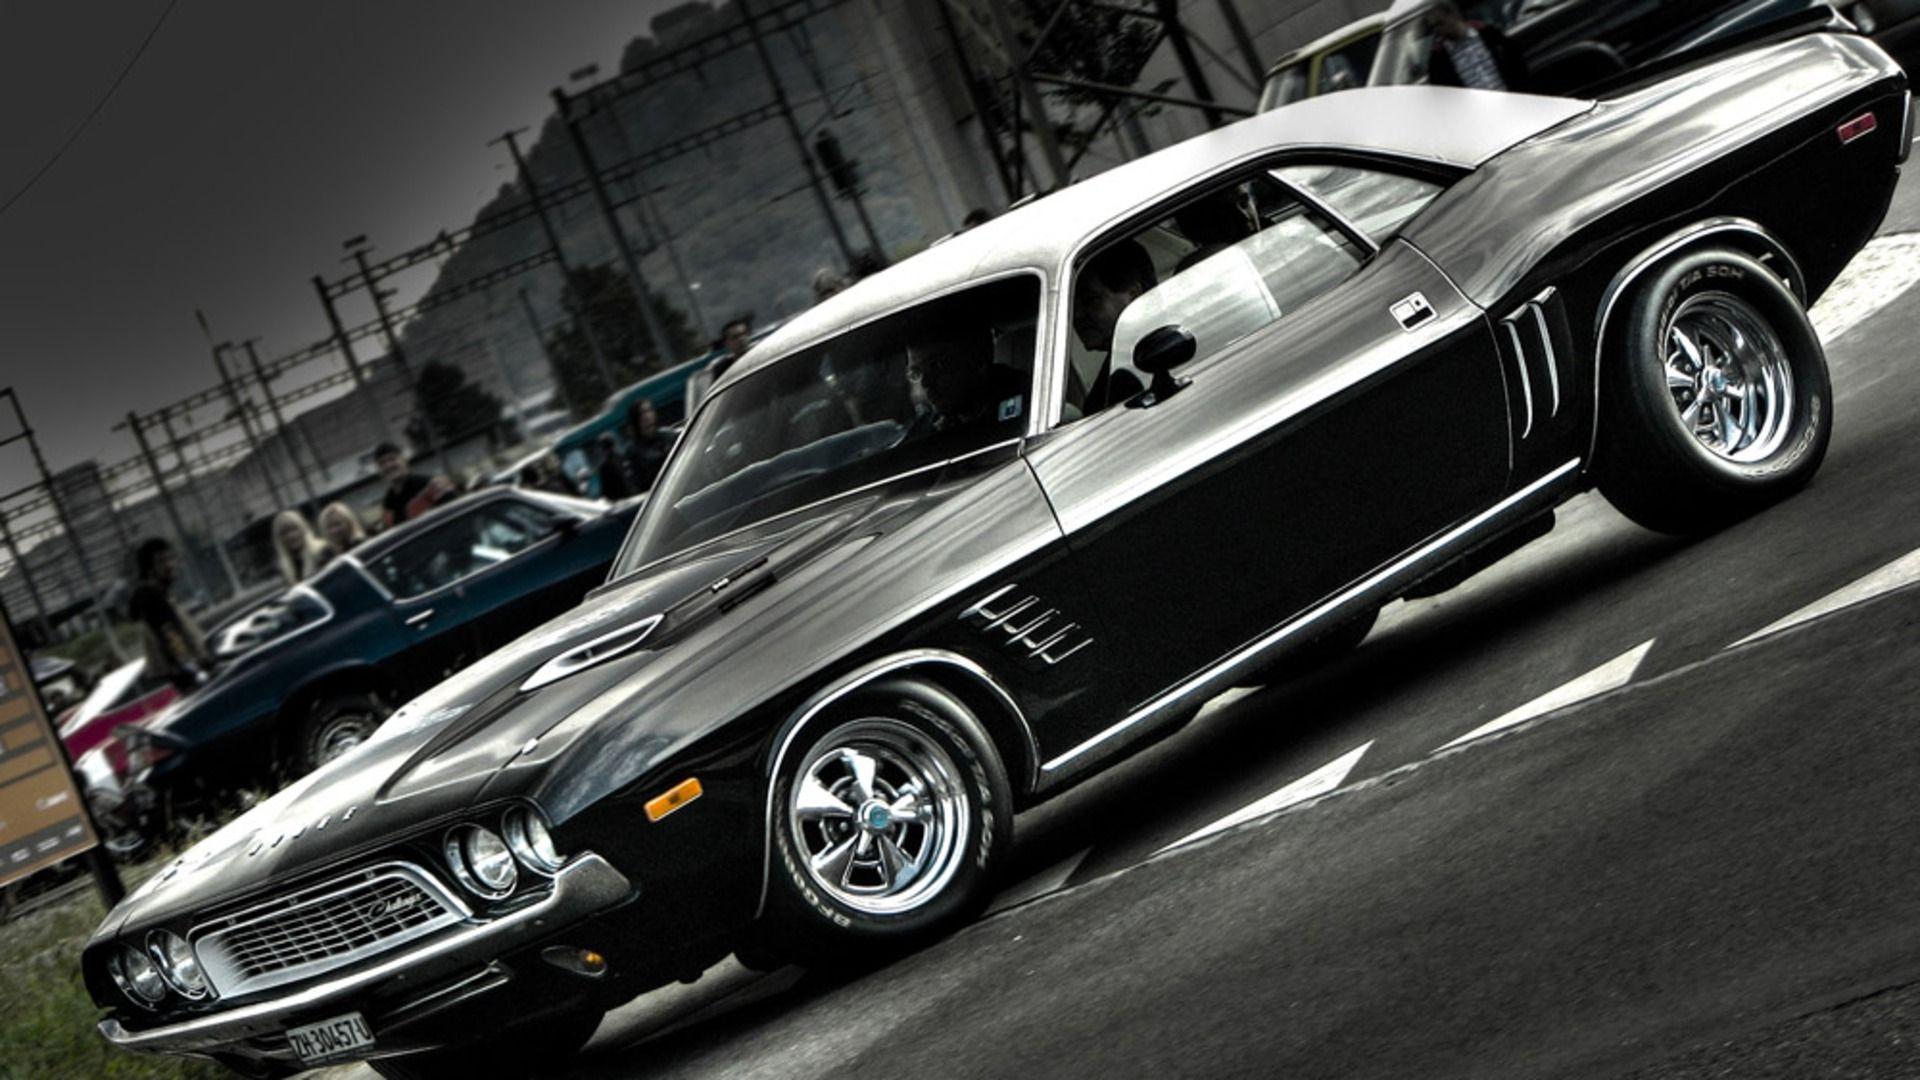 American Muscle Cars Wallpapers - Top Free American Muscle Cars ... Muscle Car Wallpaper 1920x1080